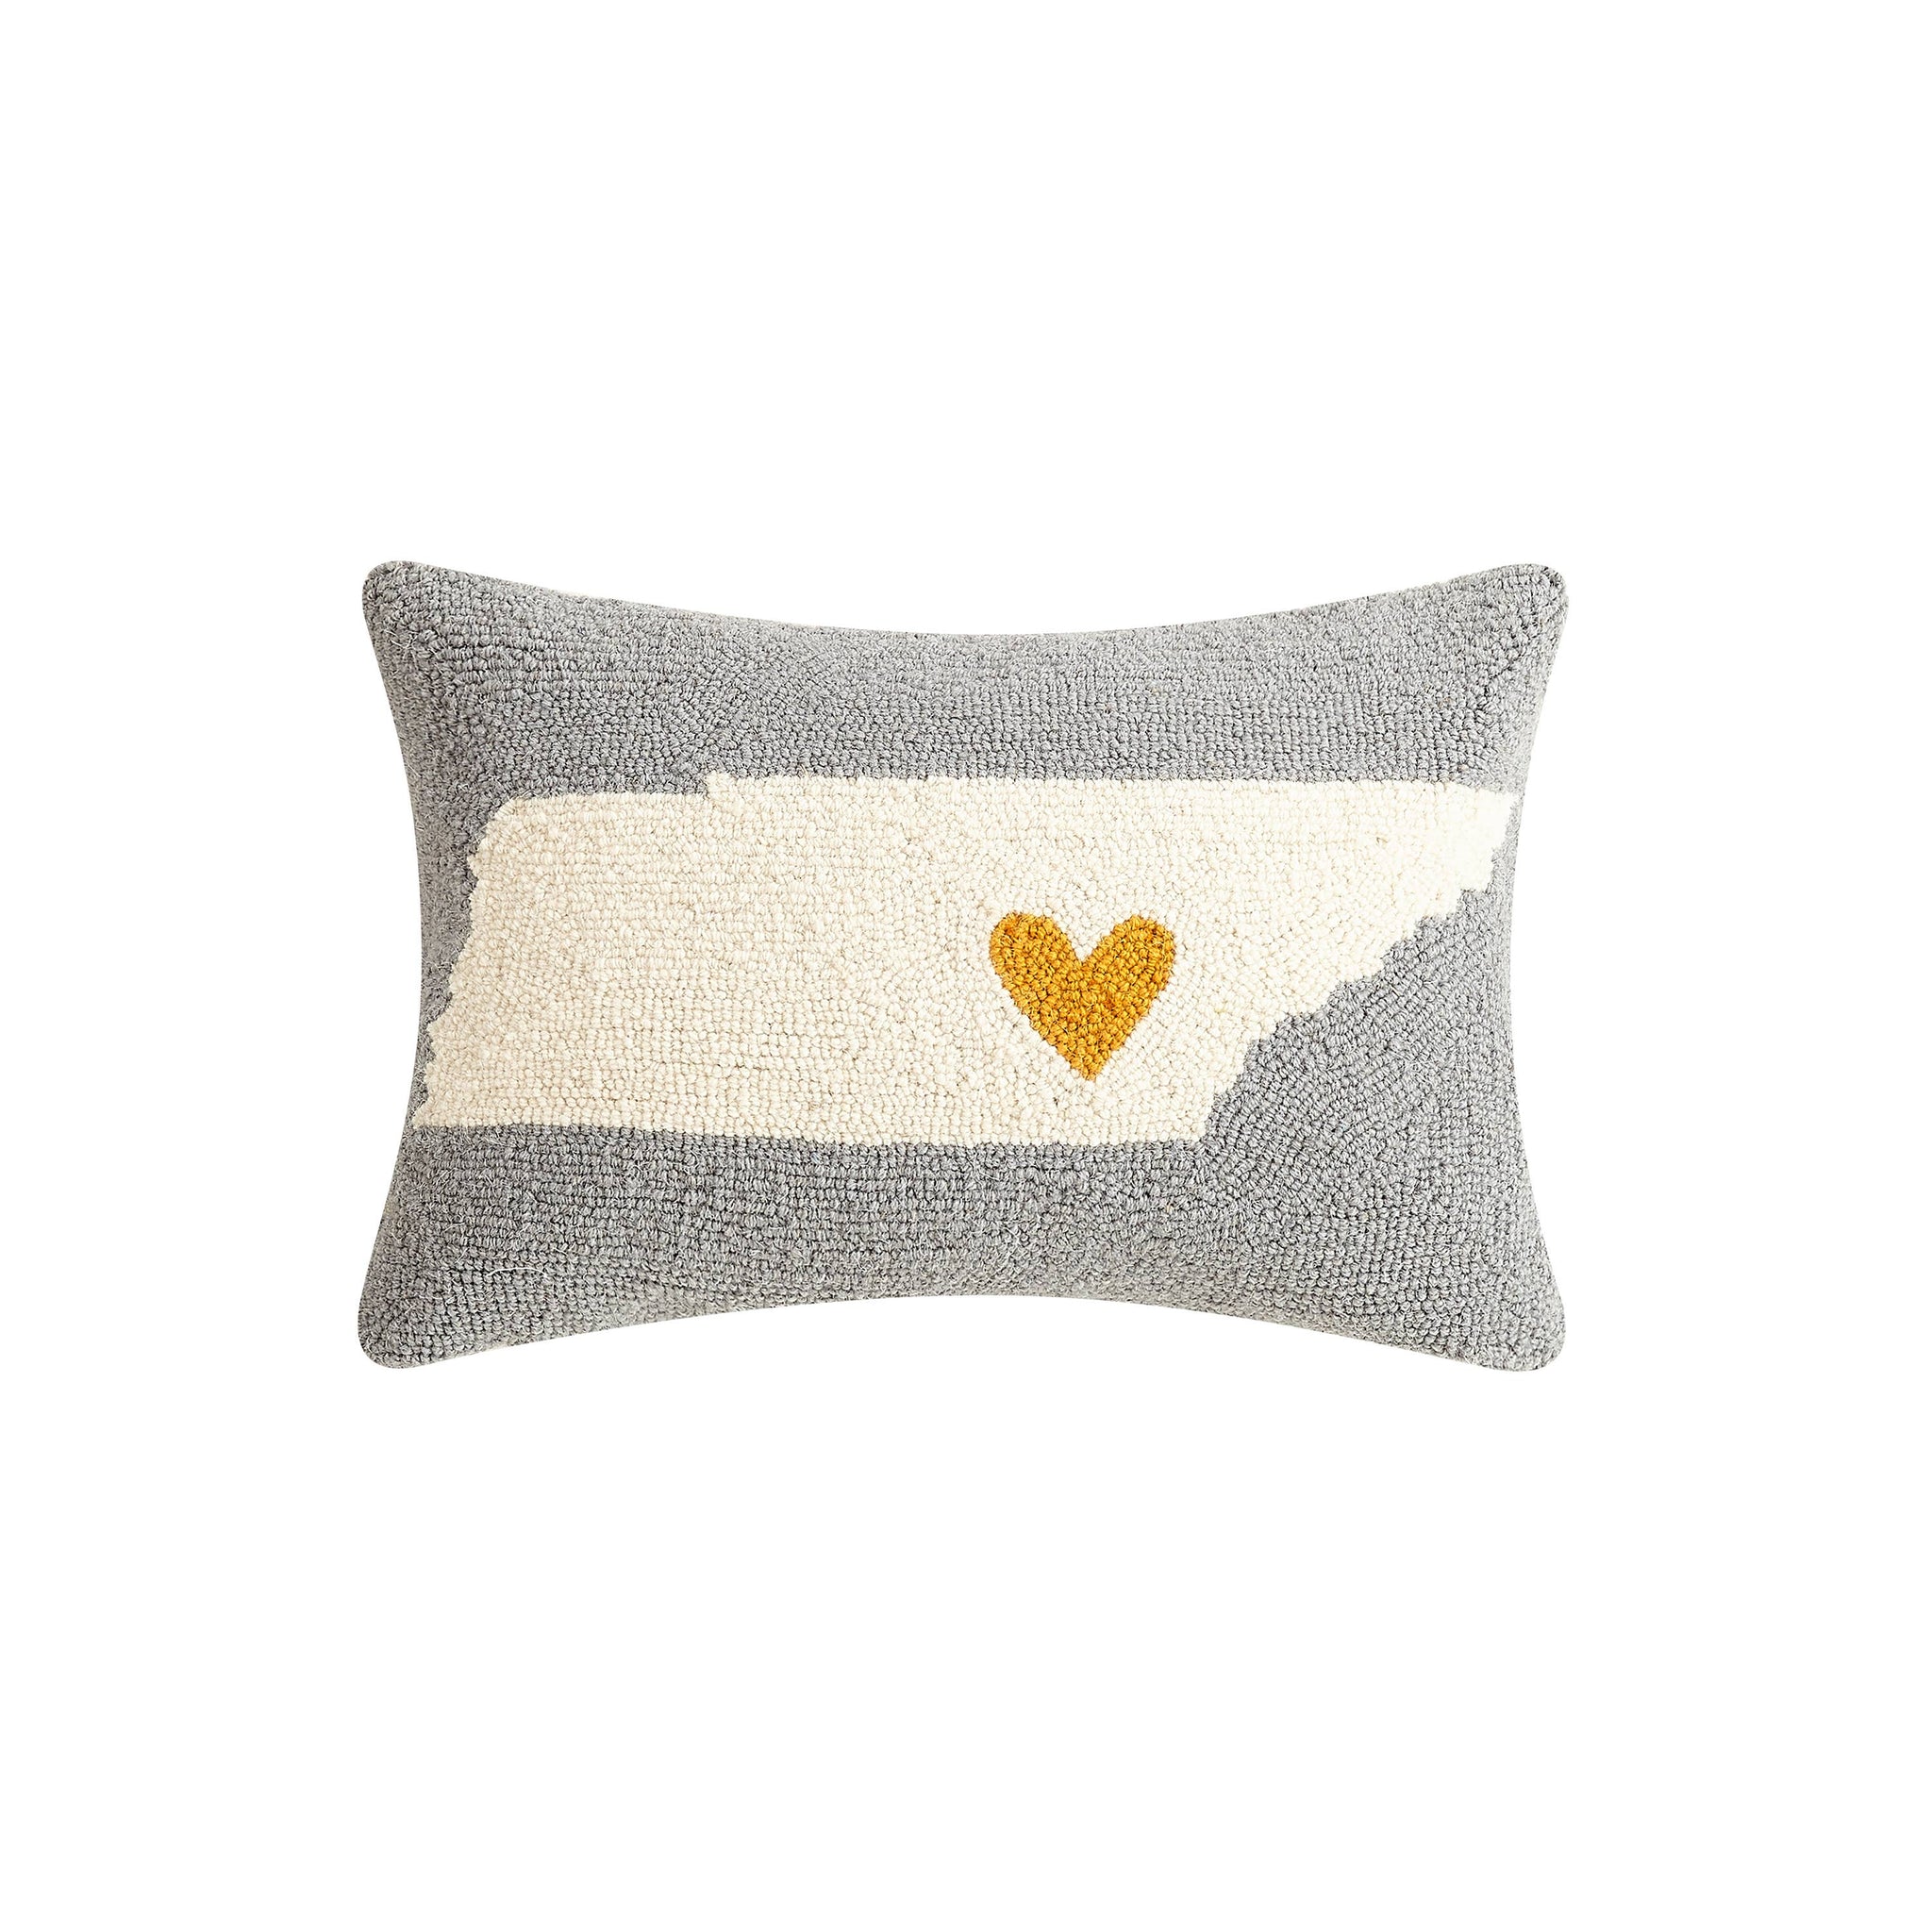 Heart In Tennessee Hook Pillow